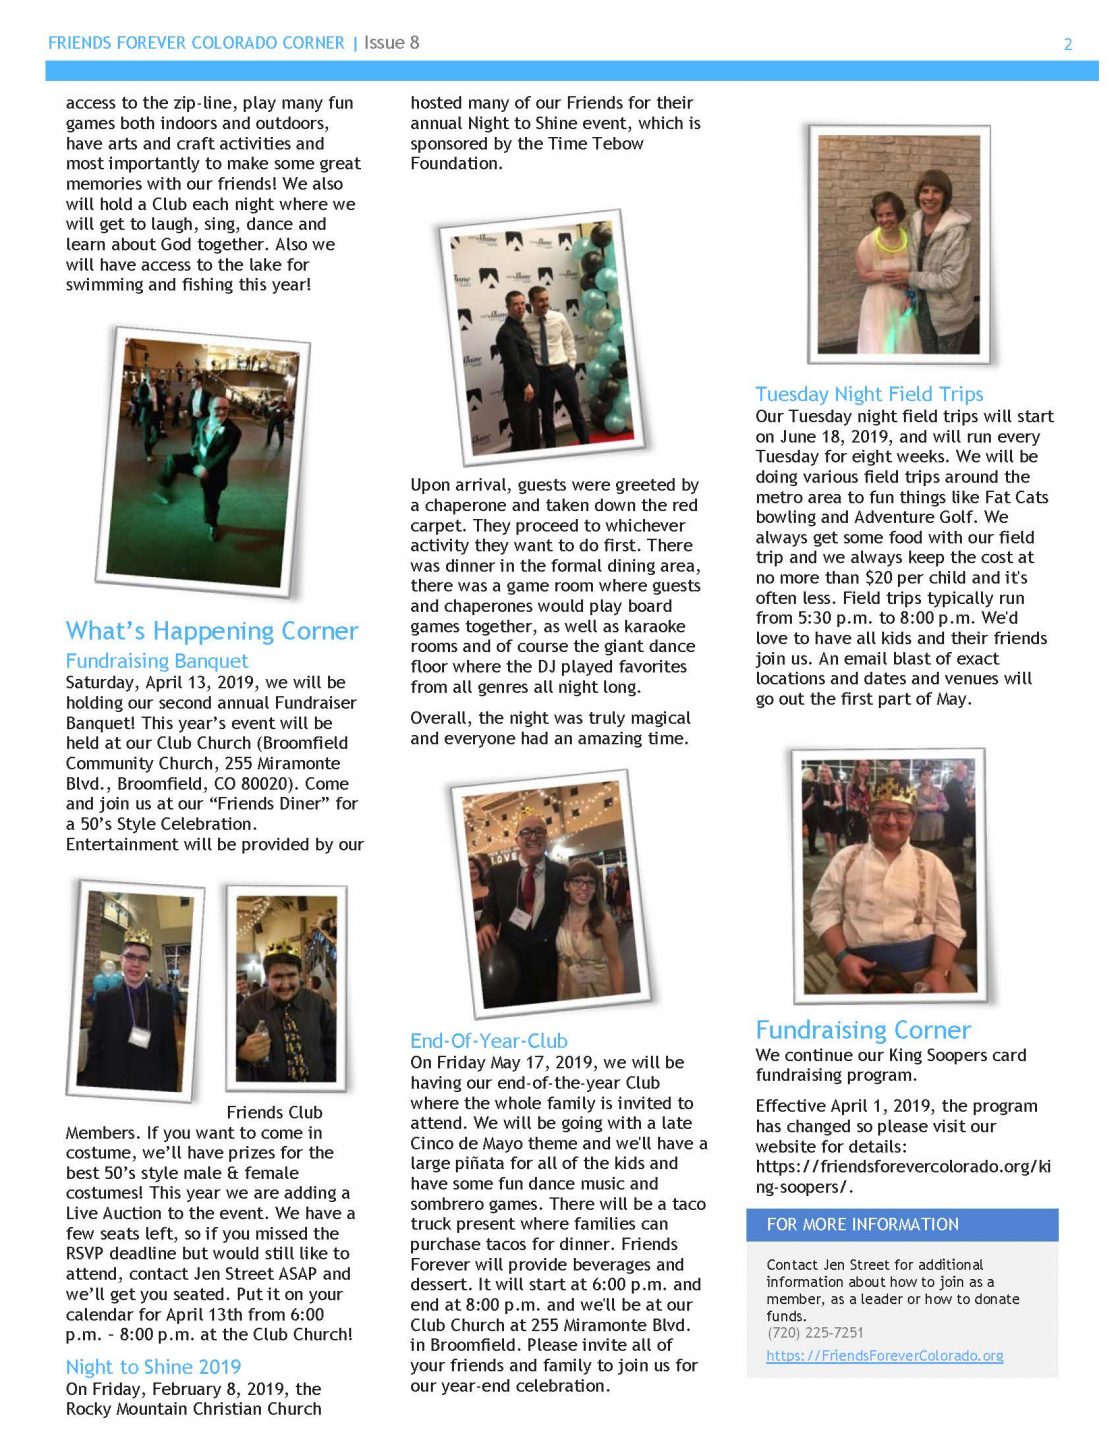 Spring 2019 Newsletter - page 2